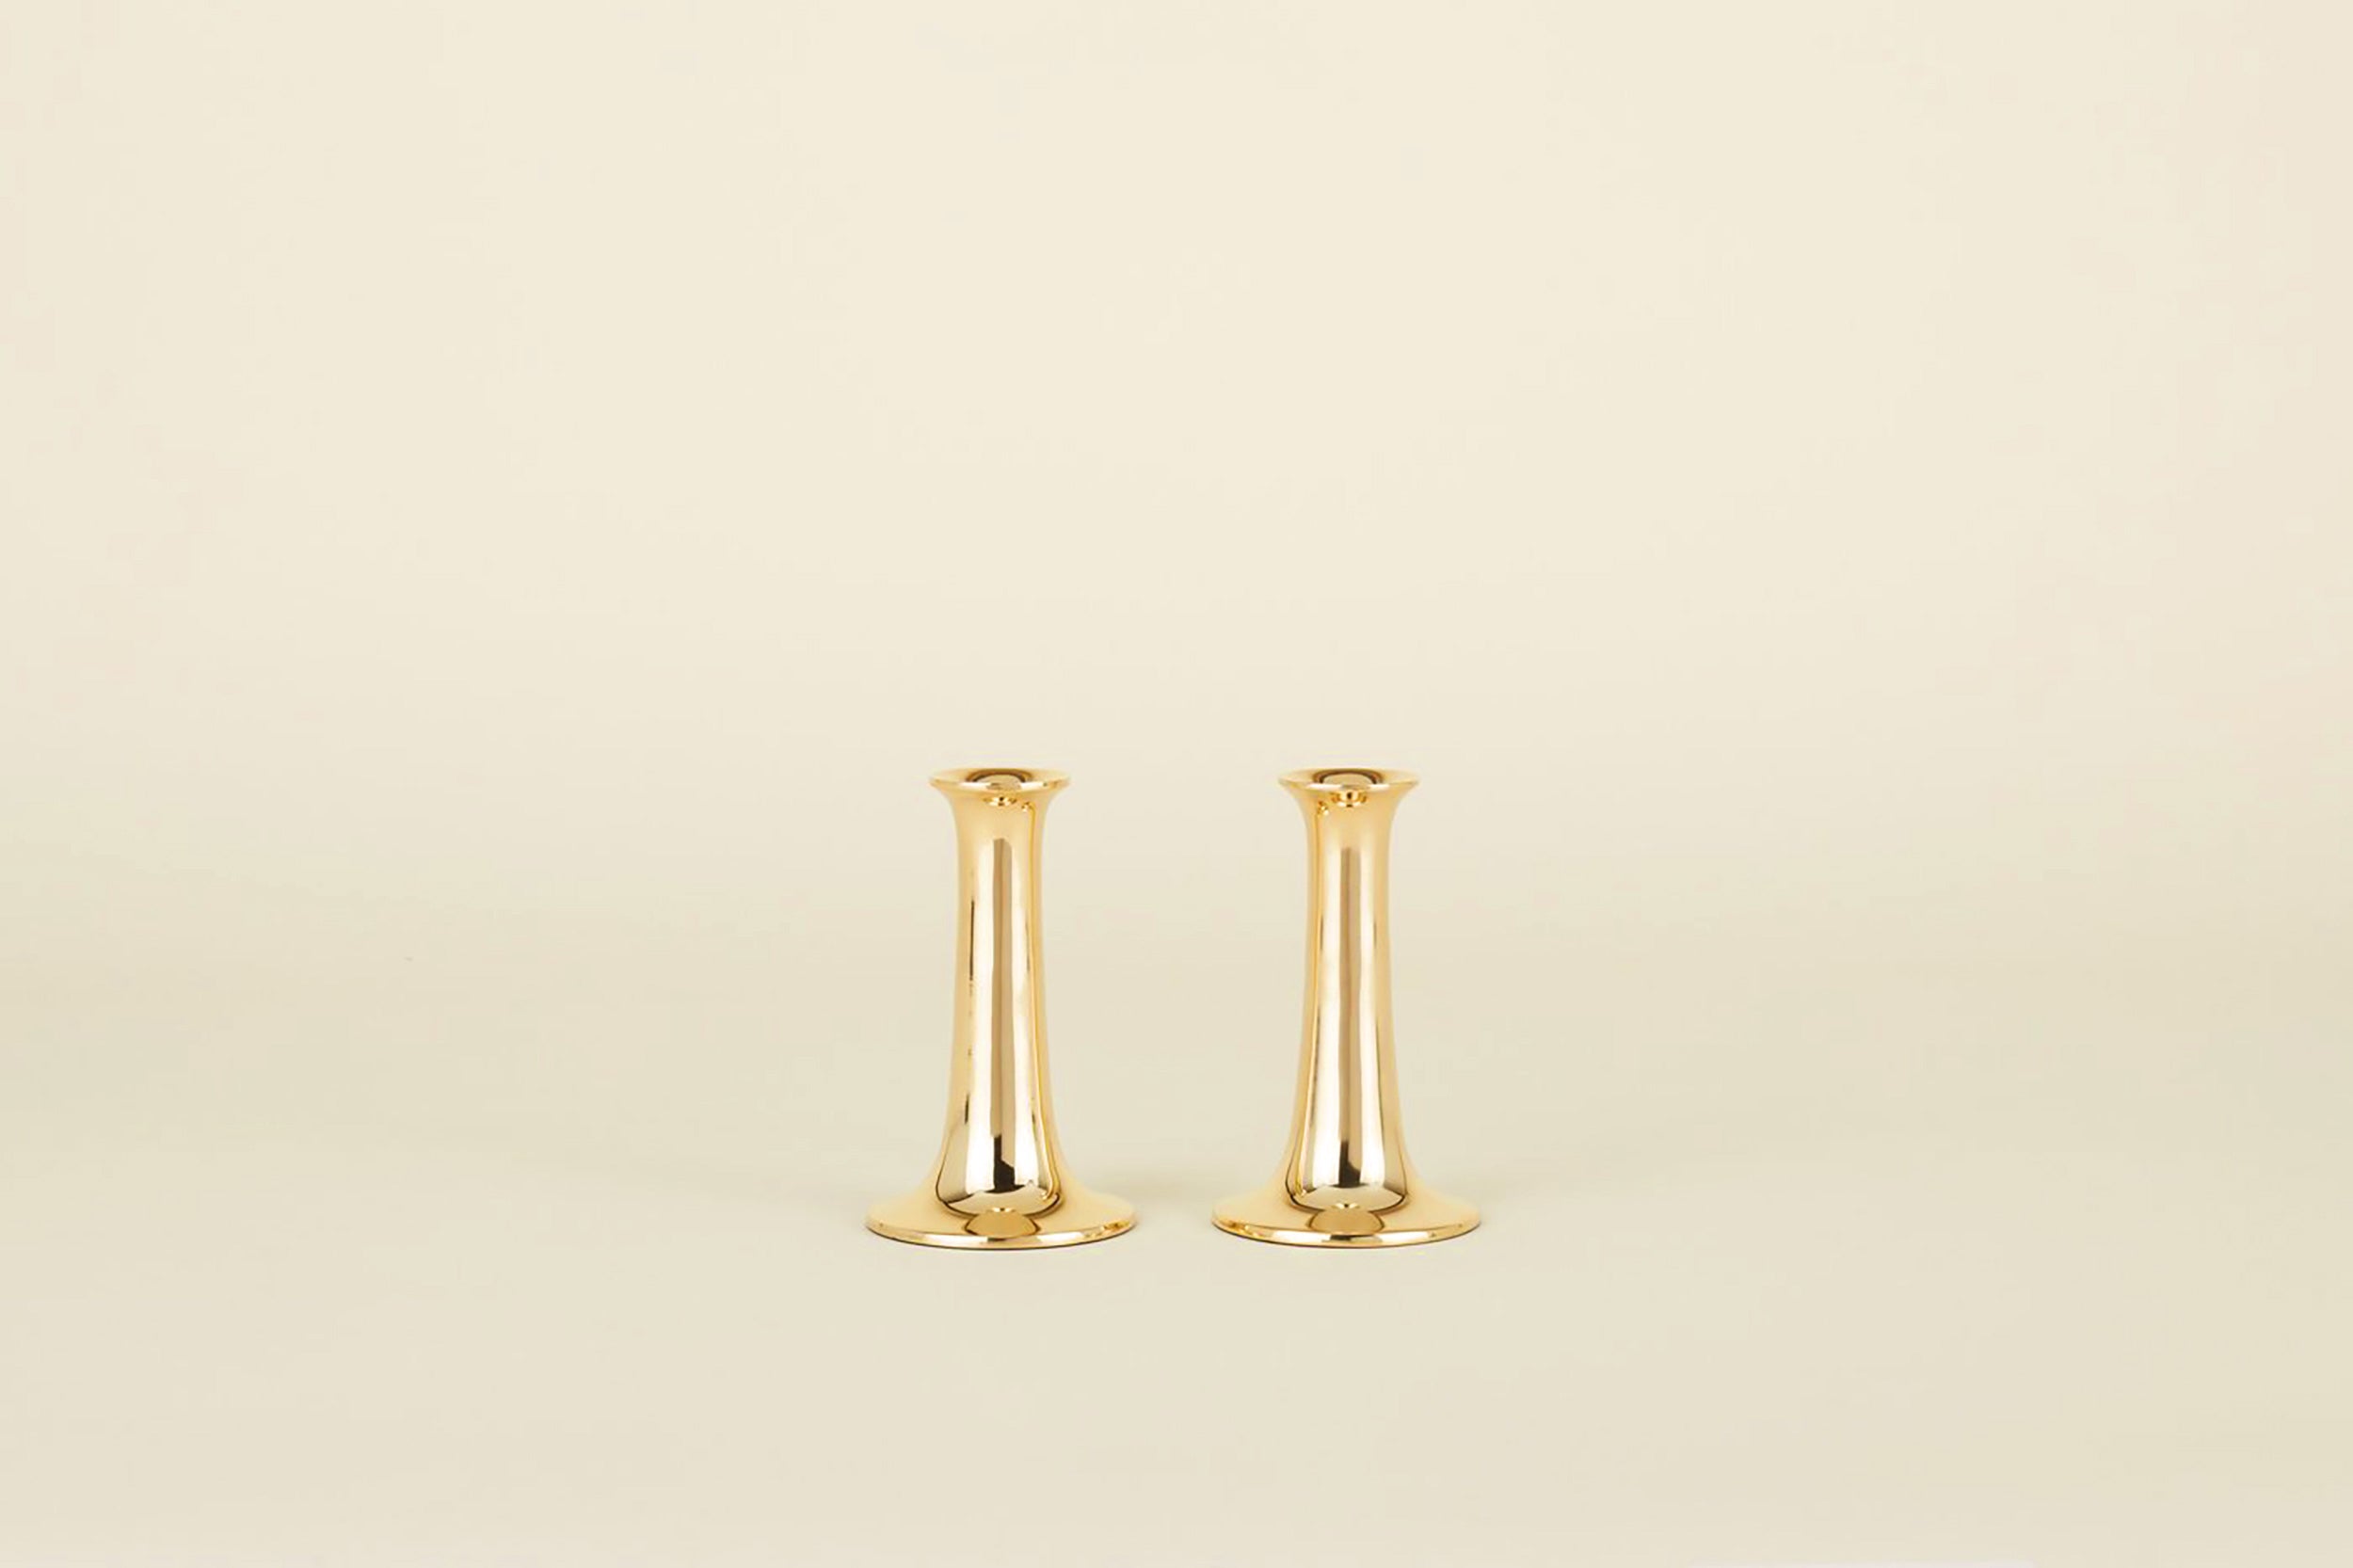 Hawkins NY-Simple Candle Holder // Brass